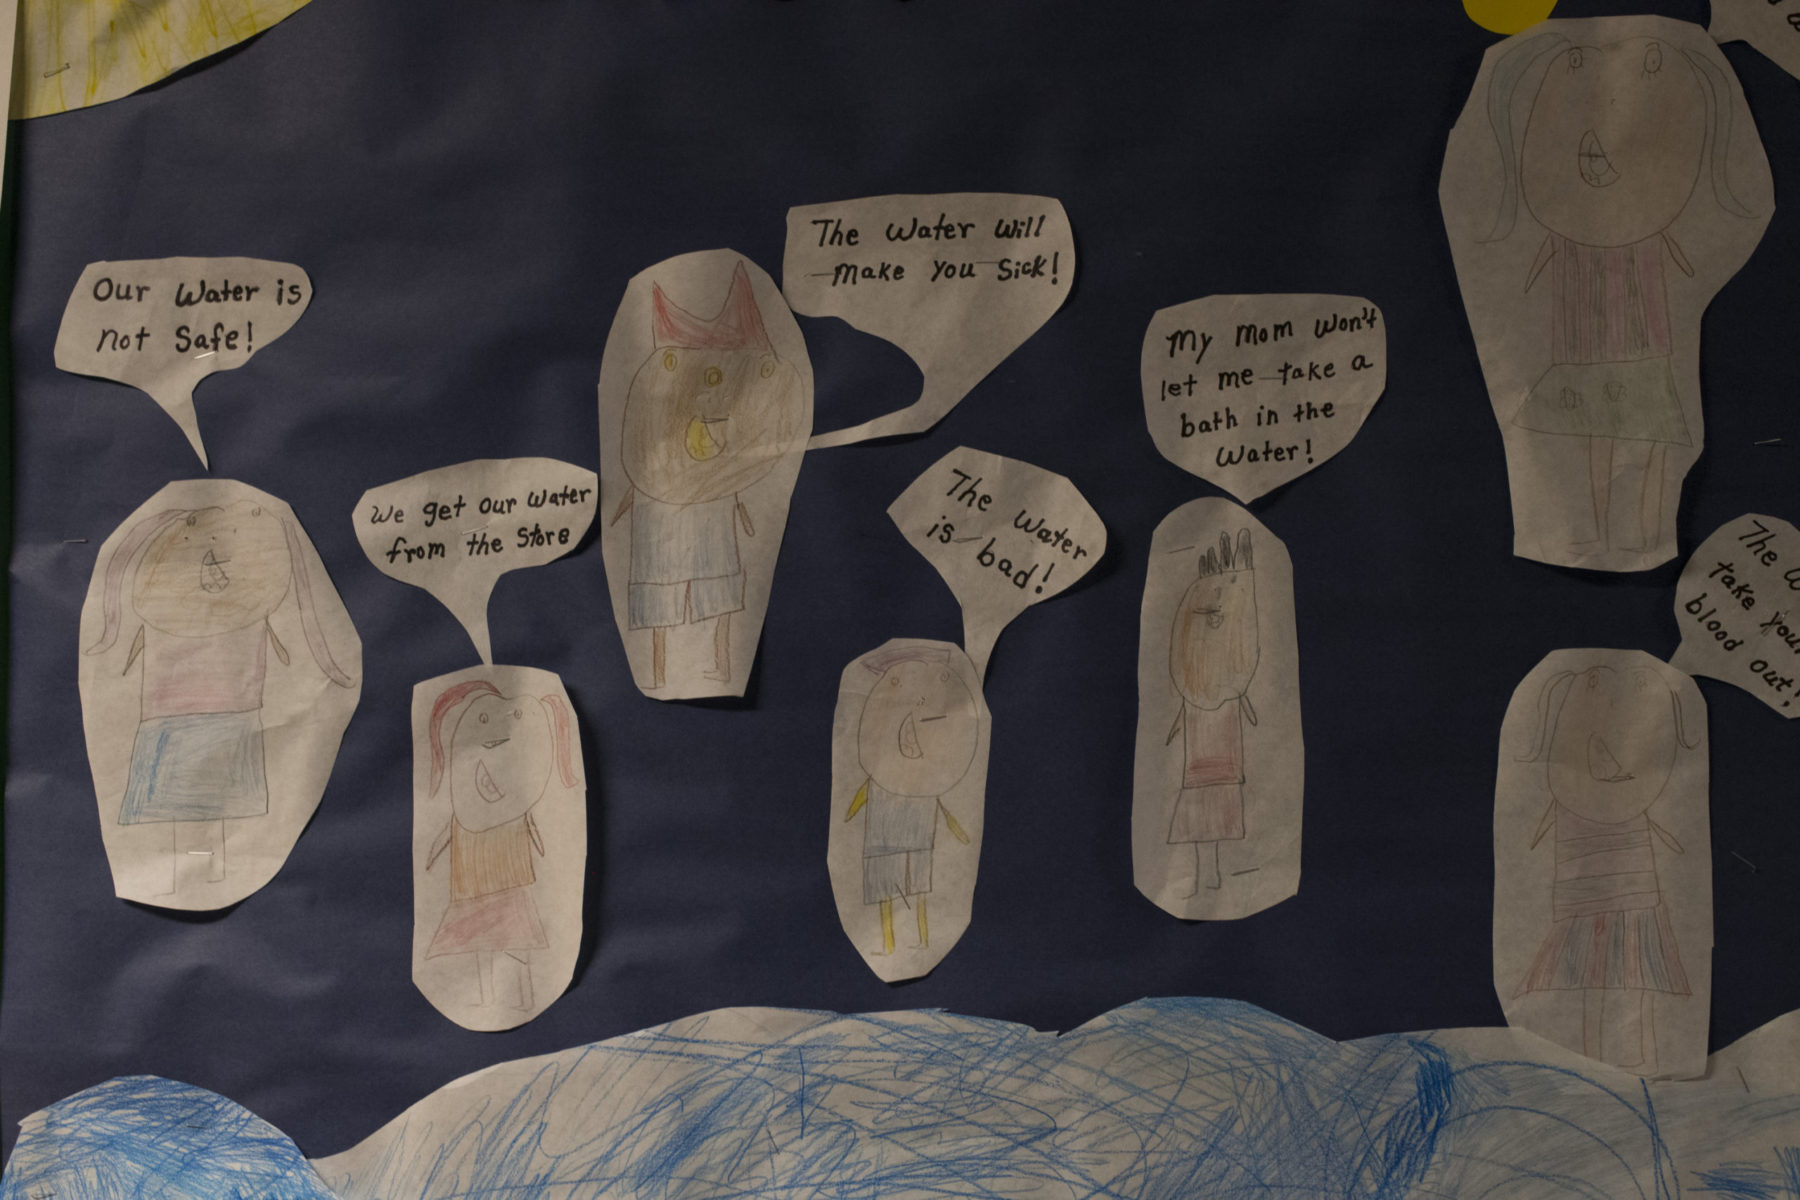 Drawings by children of people saying the water is unsafe